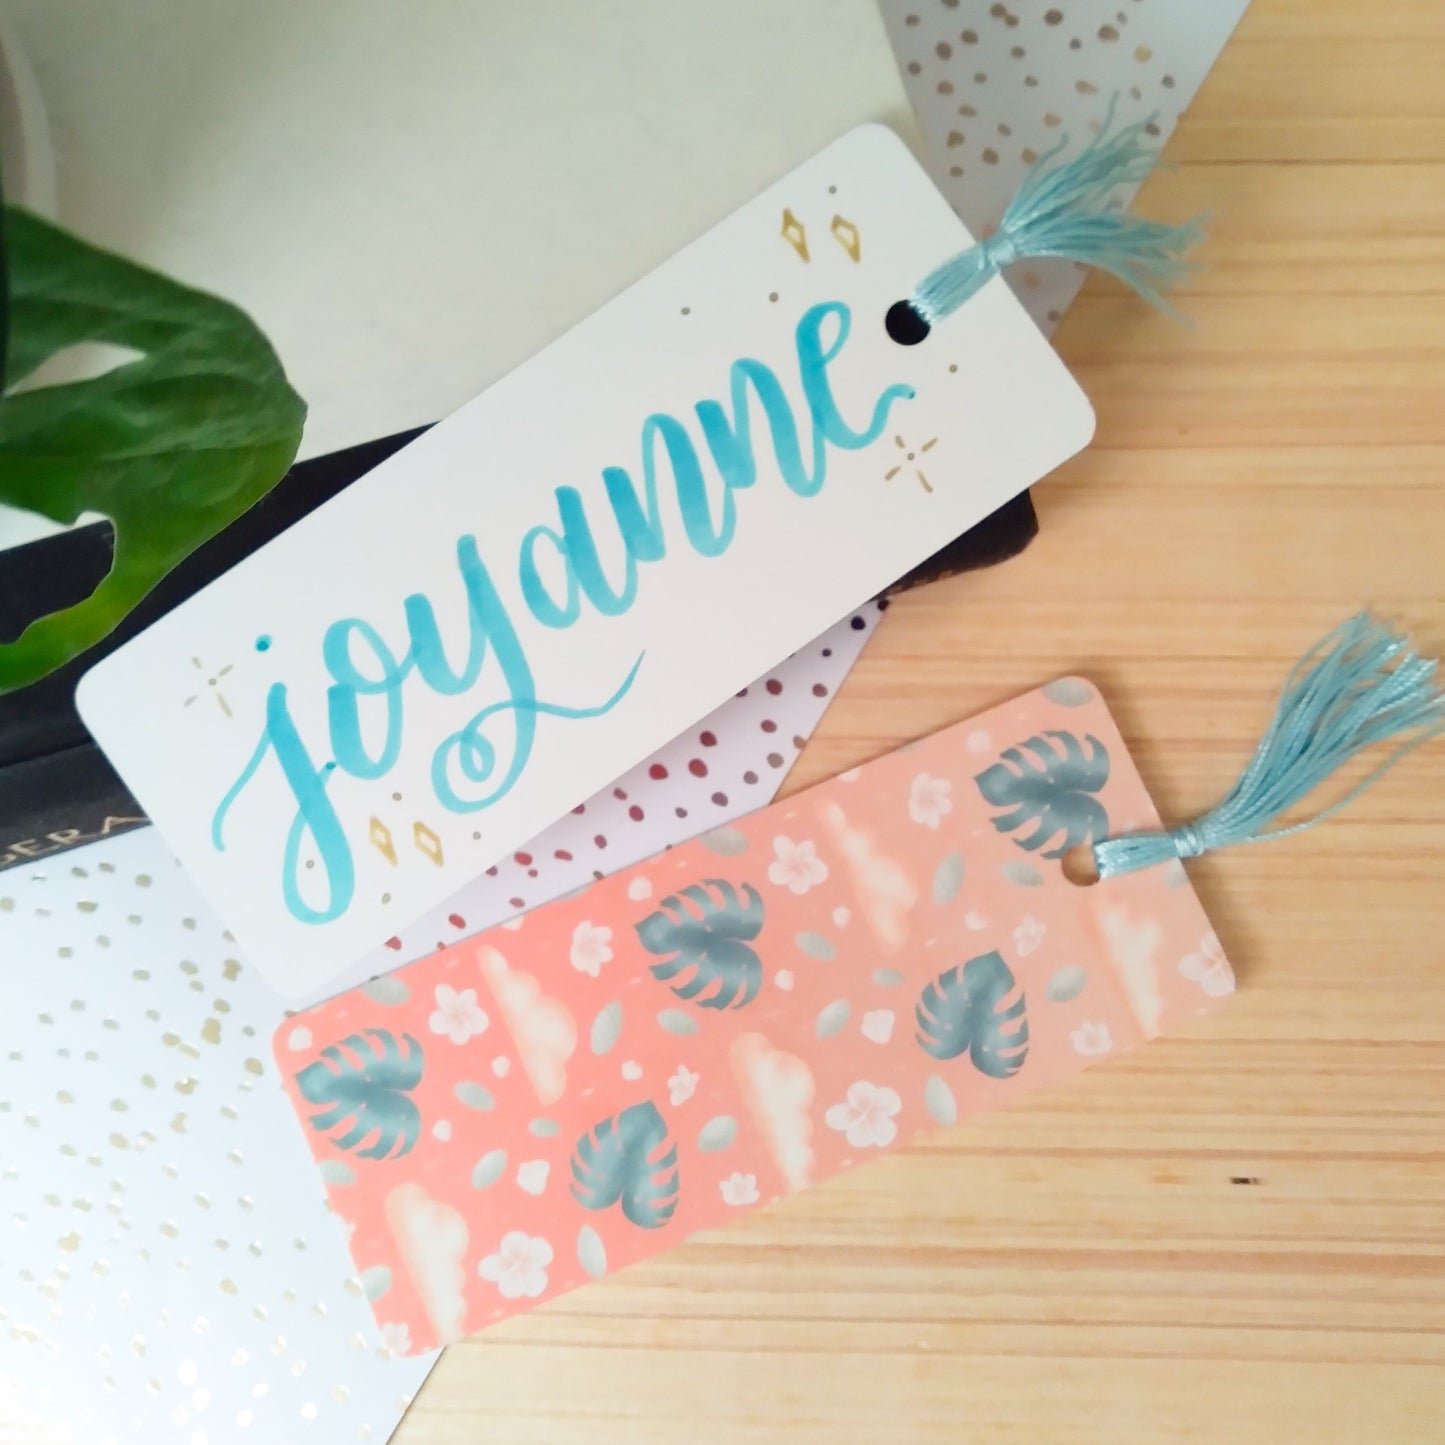 Dreamy Tropical Pattern Bookmark